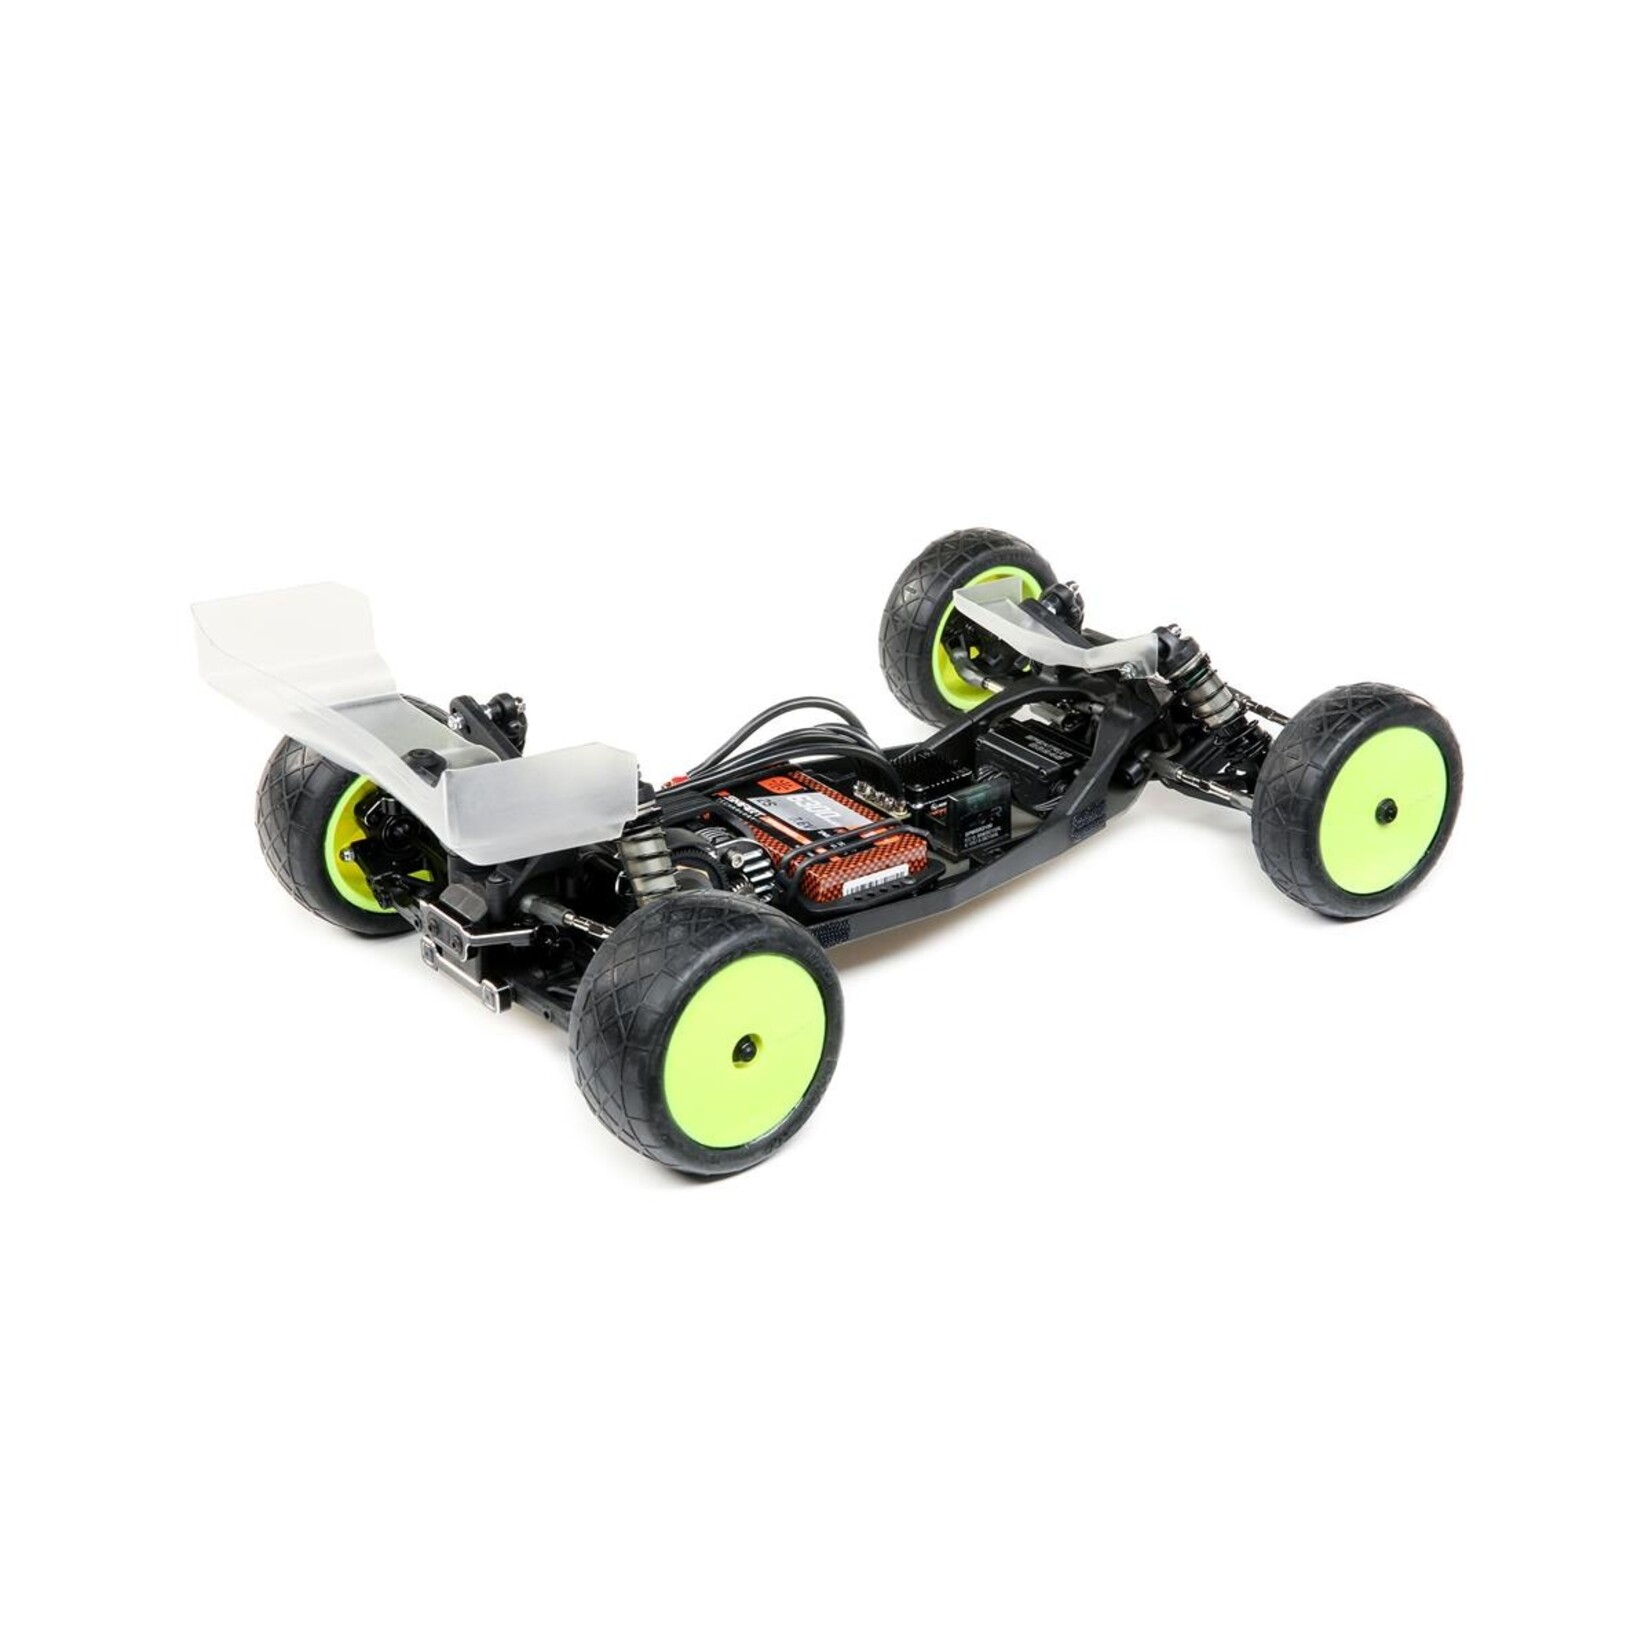 TLR Team Losi Racing 22 5.0 DC Race Roller 1/10 2WD Electric Buggy Kit (Dirt/Clay) #TLR03012